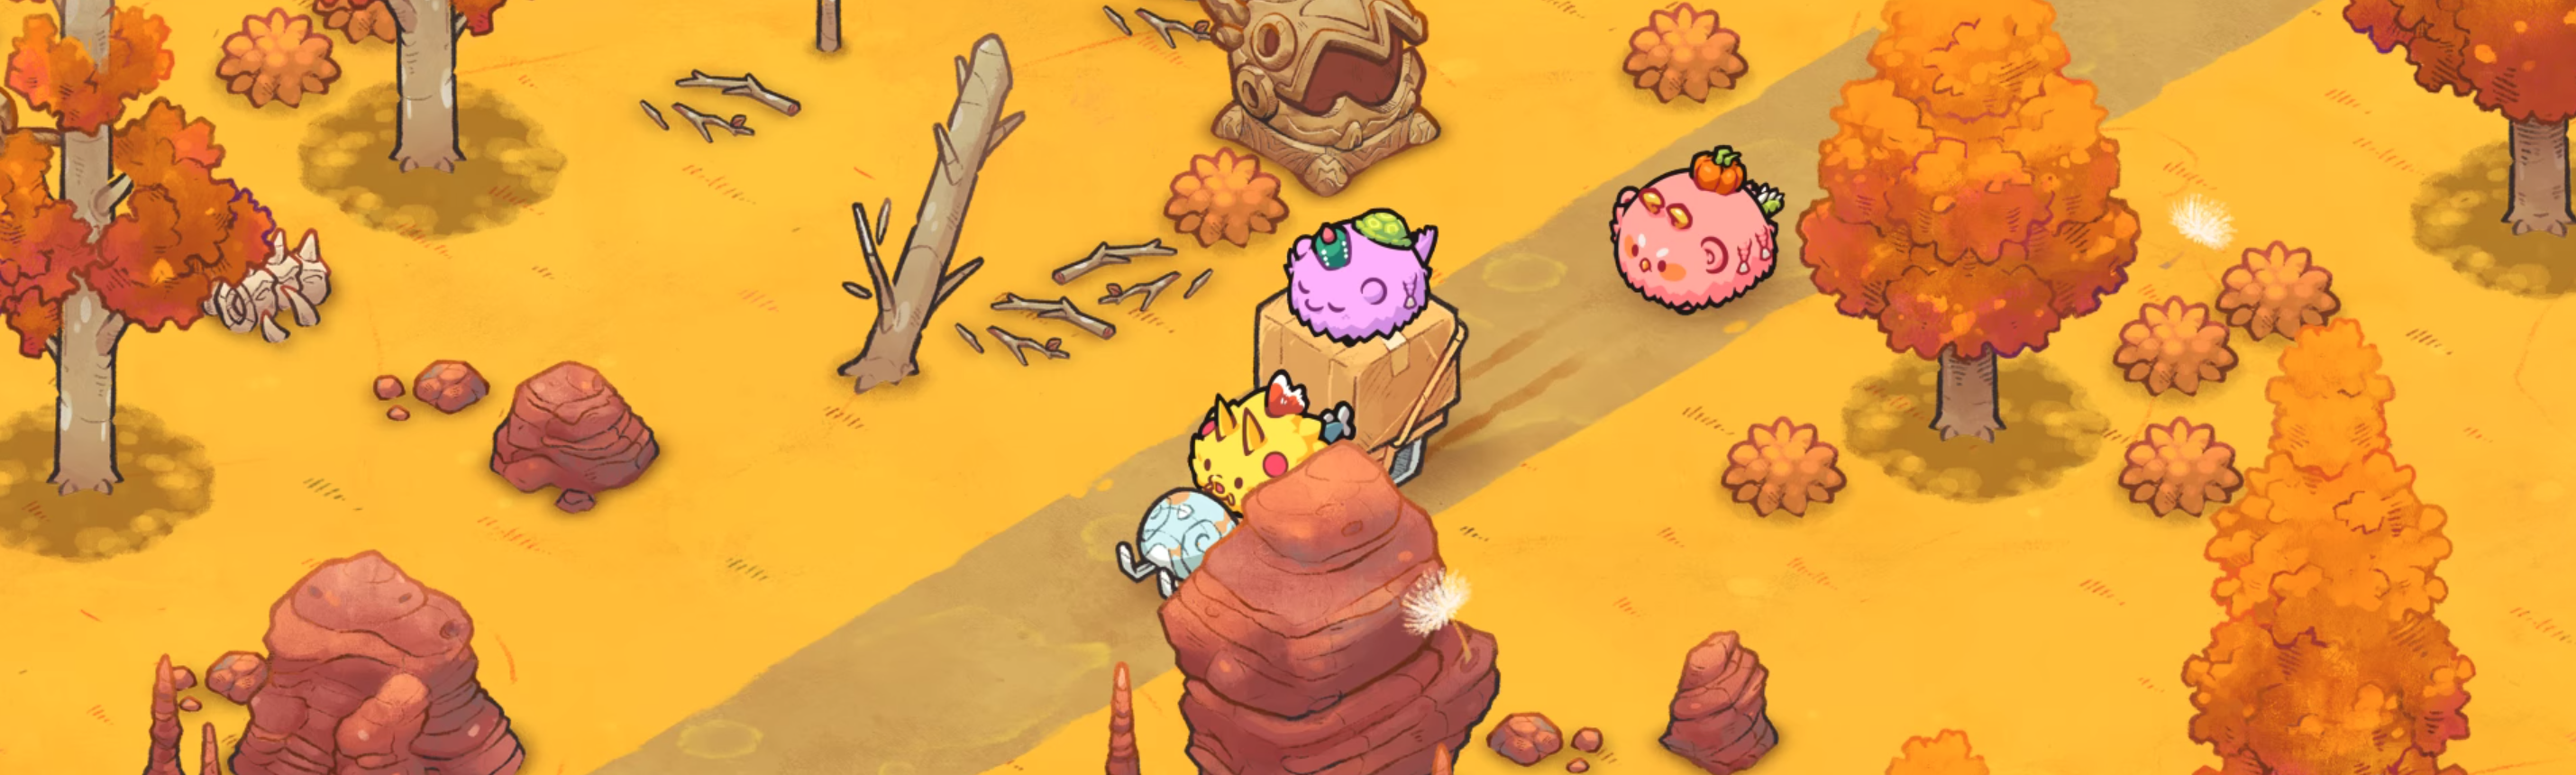 A screenshot from the Axie Infinity game.